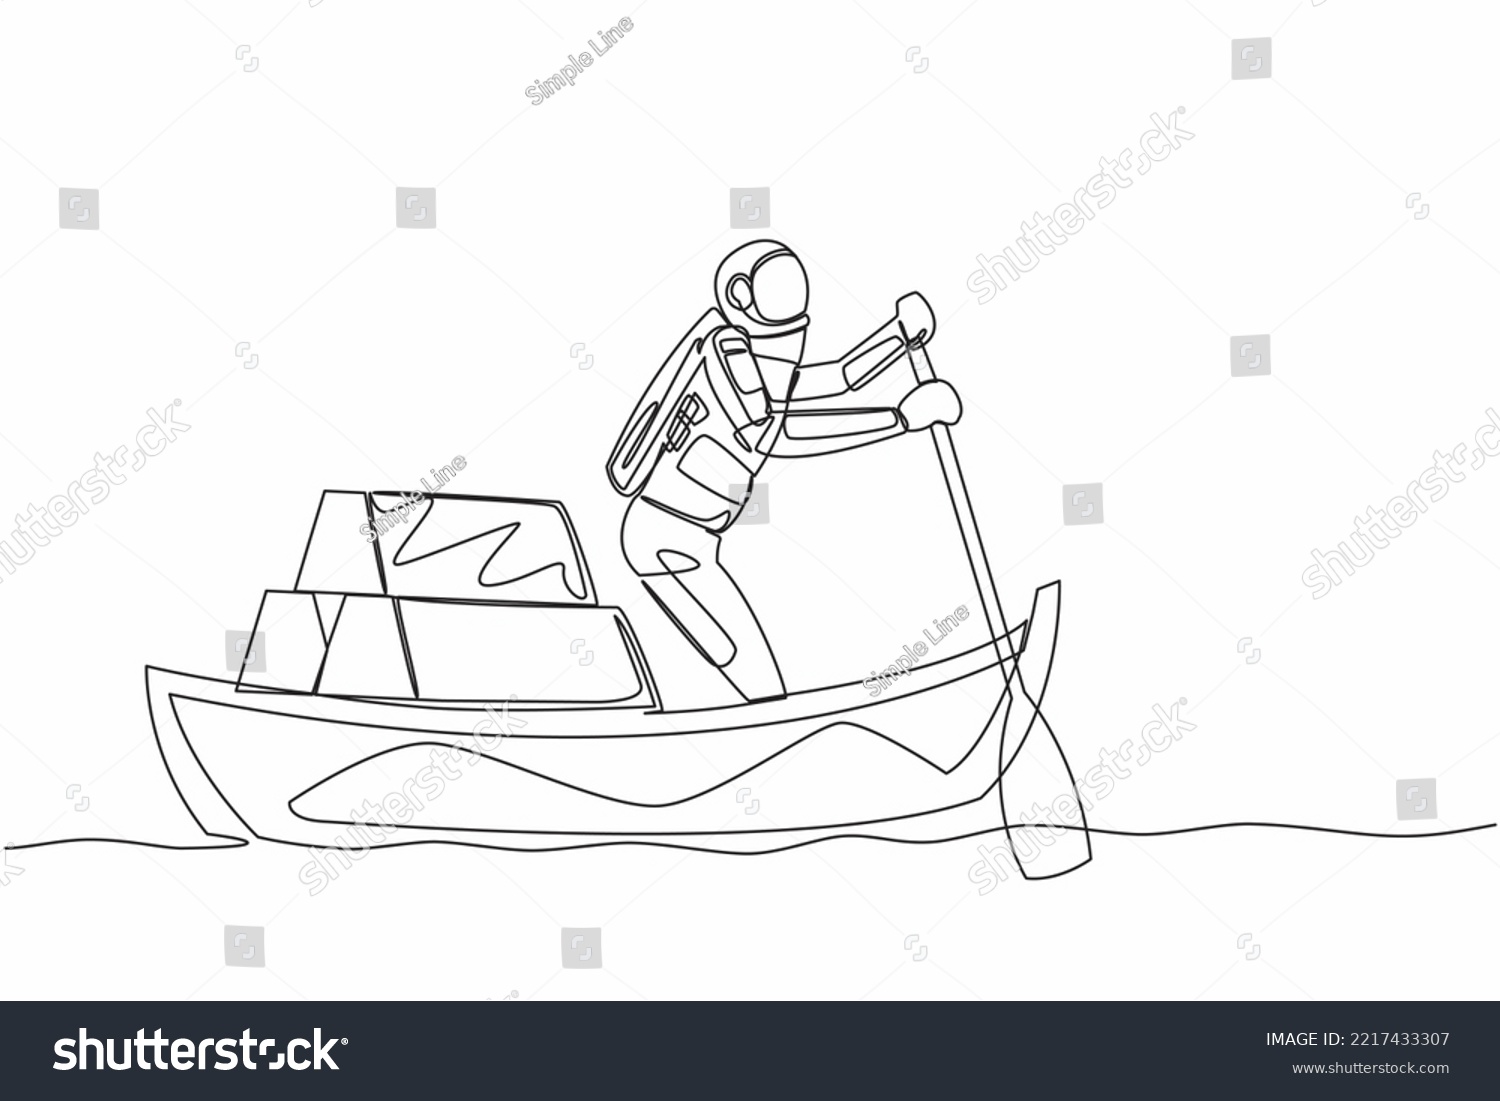 SVG of Single continuous line drawing young astronaut sailing away on boat with stack of golden bullion. Gold investment for inter galactic mission. Cosmonaut deep space. One line design vector illustration svg